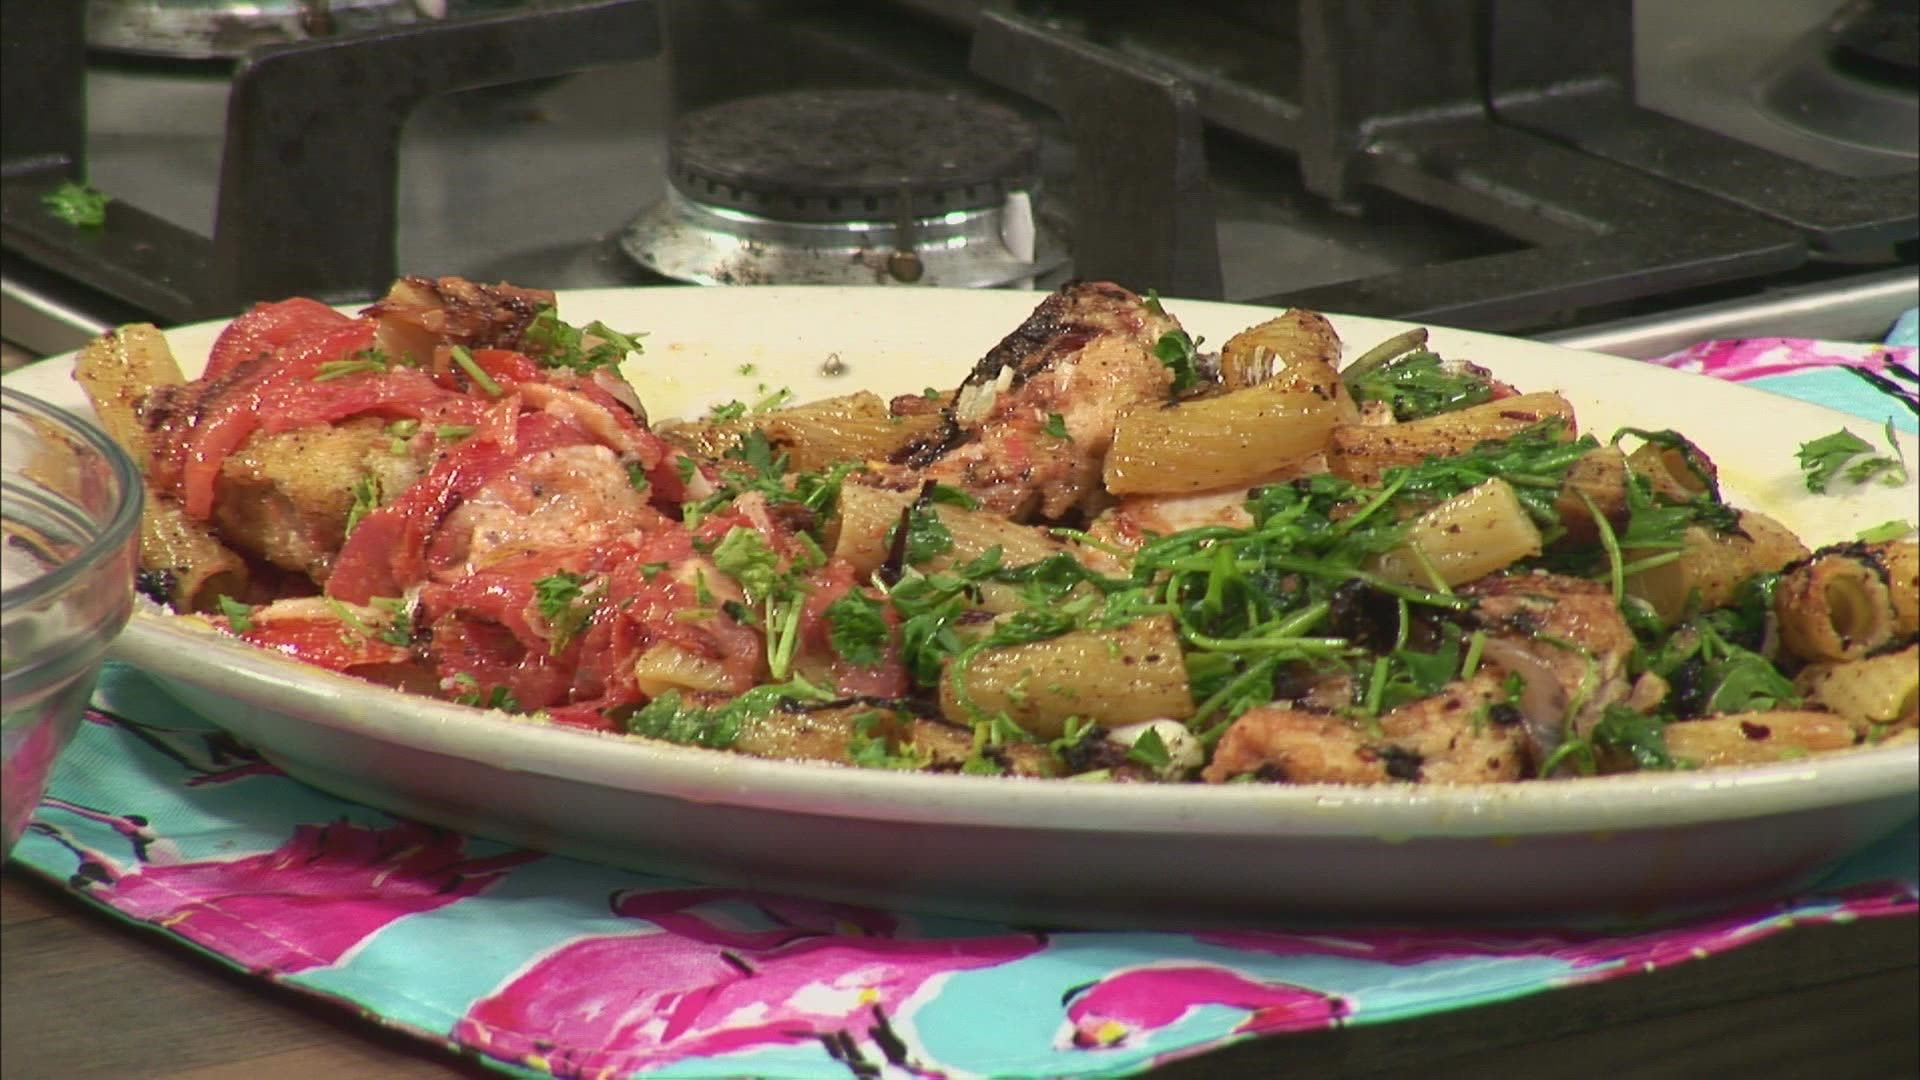 Kerry Altiero from Café Miranda shares a recipe that’s great for using some of that left over food in your fridge.